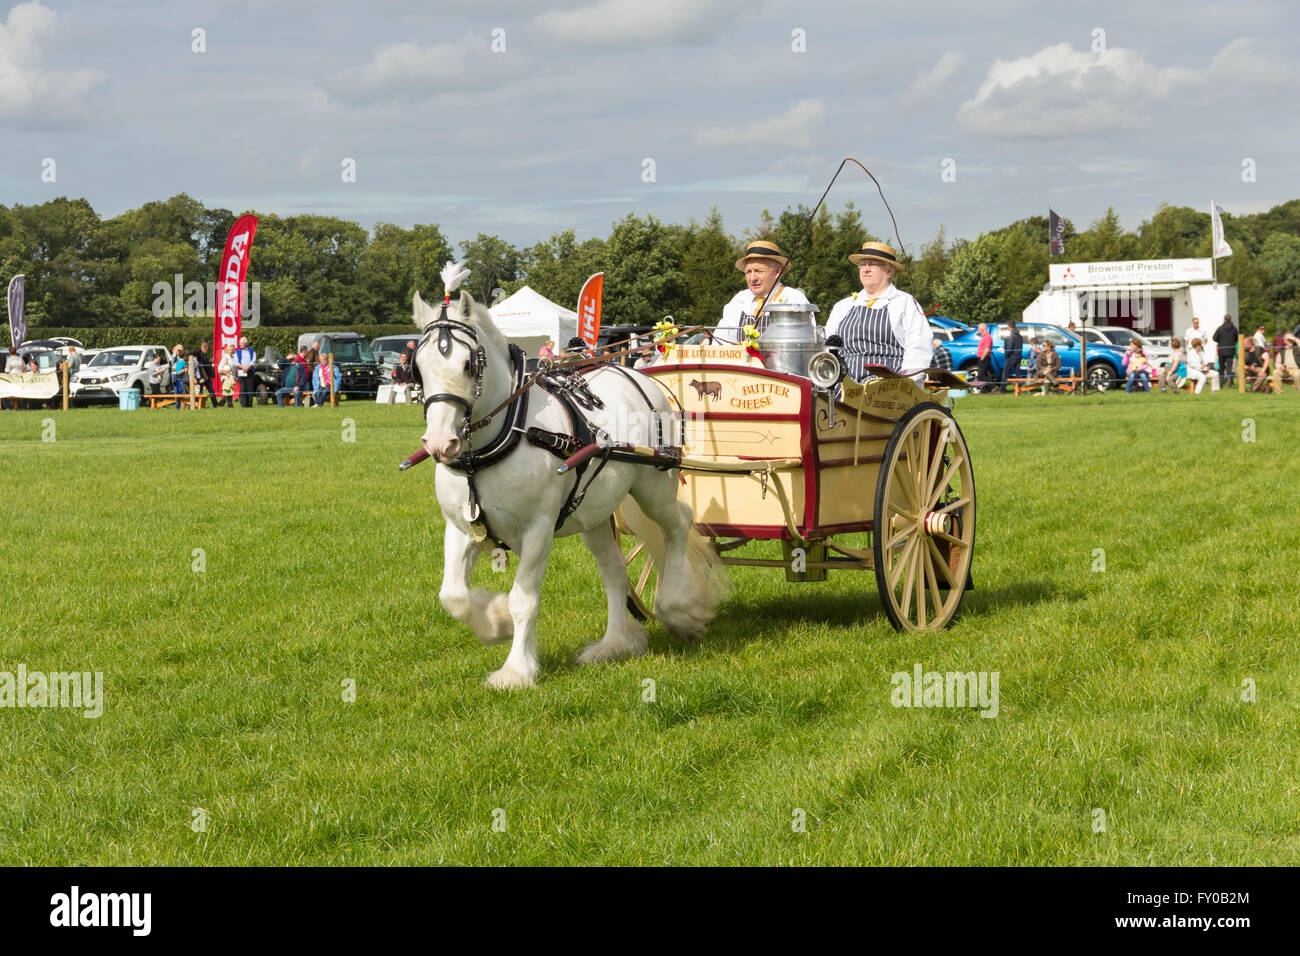 Heavy horse and milk cart turnout of The Little Dairy in the main ring at the Lancashire Game and Country Fair 2015. Stock Photo